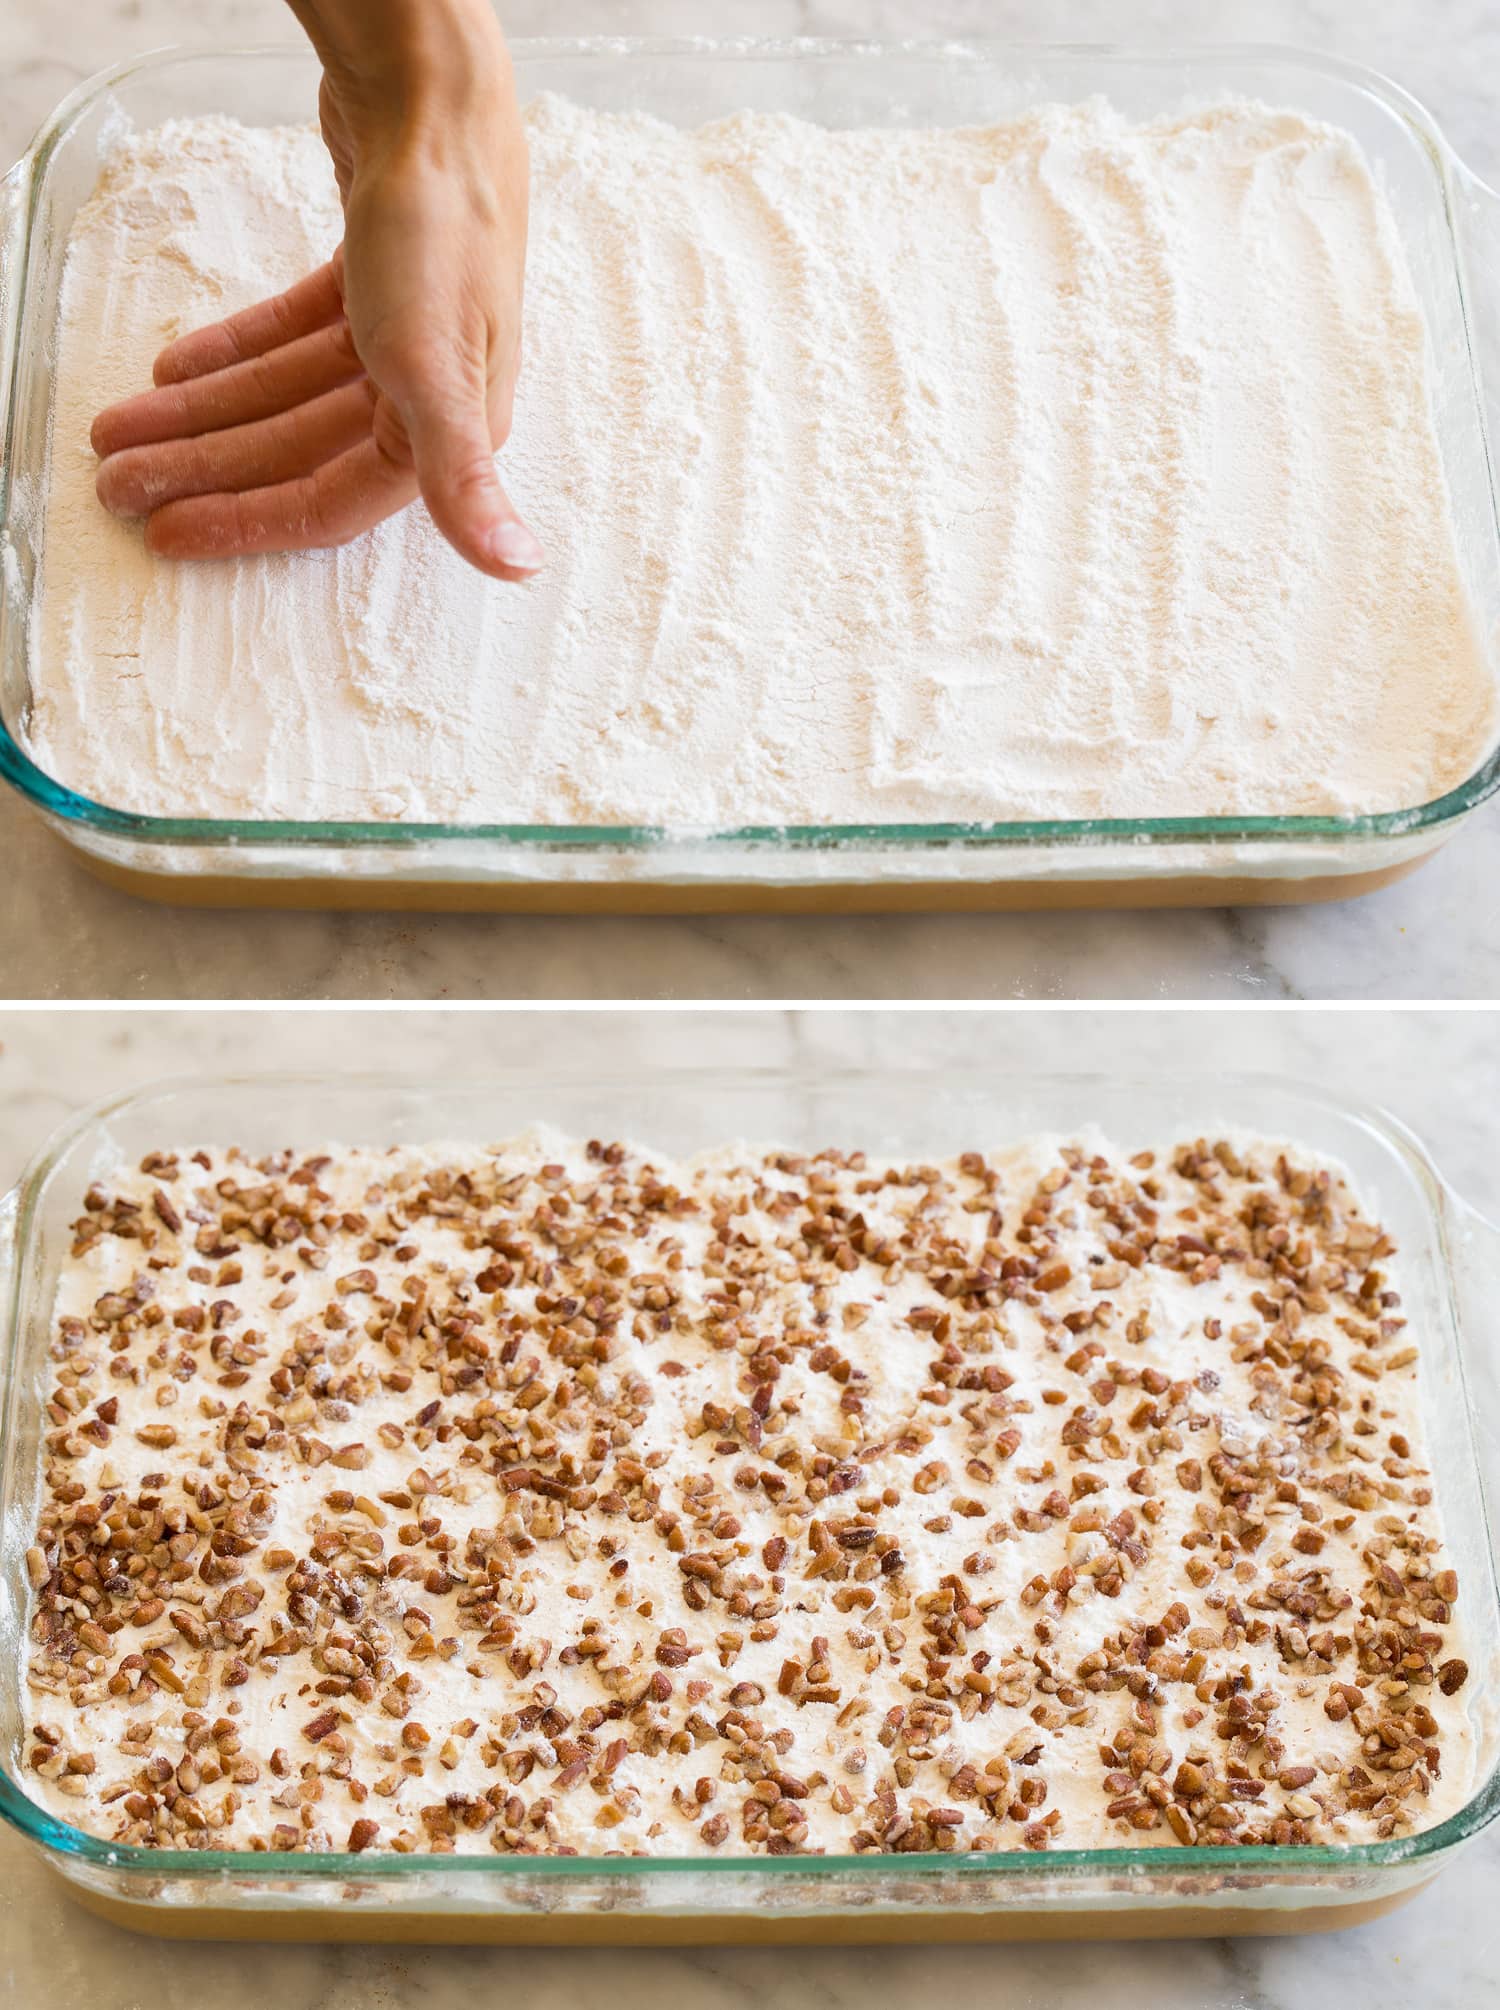 Layering cake mix and pecans for cake.